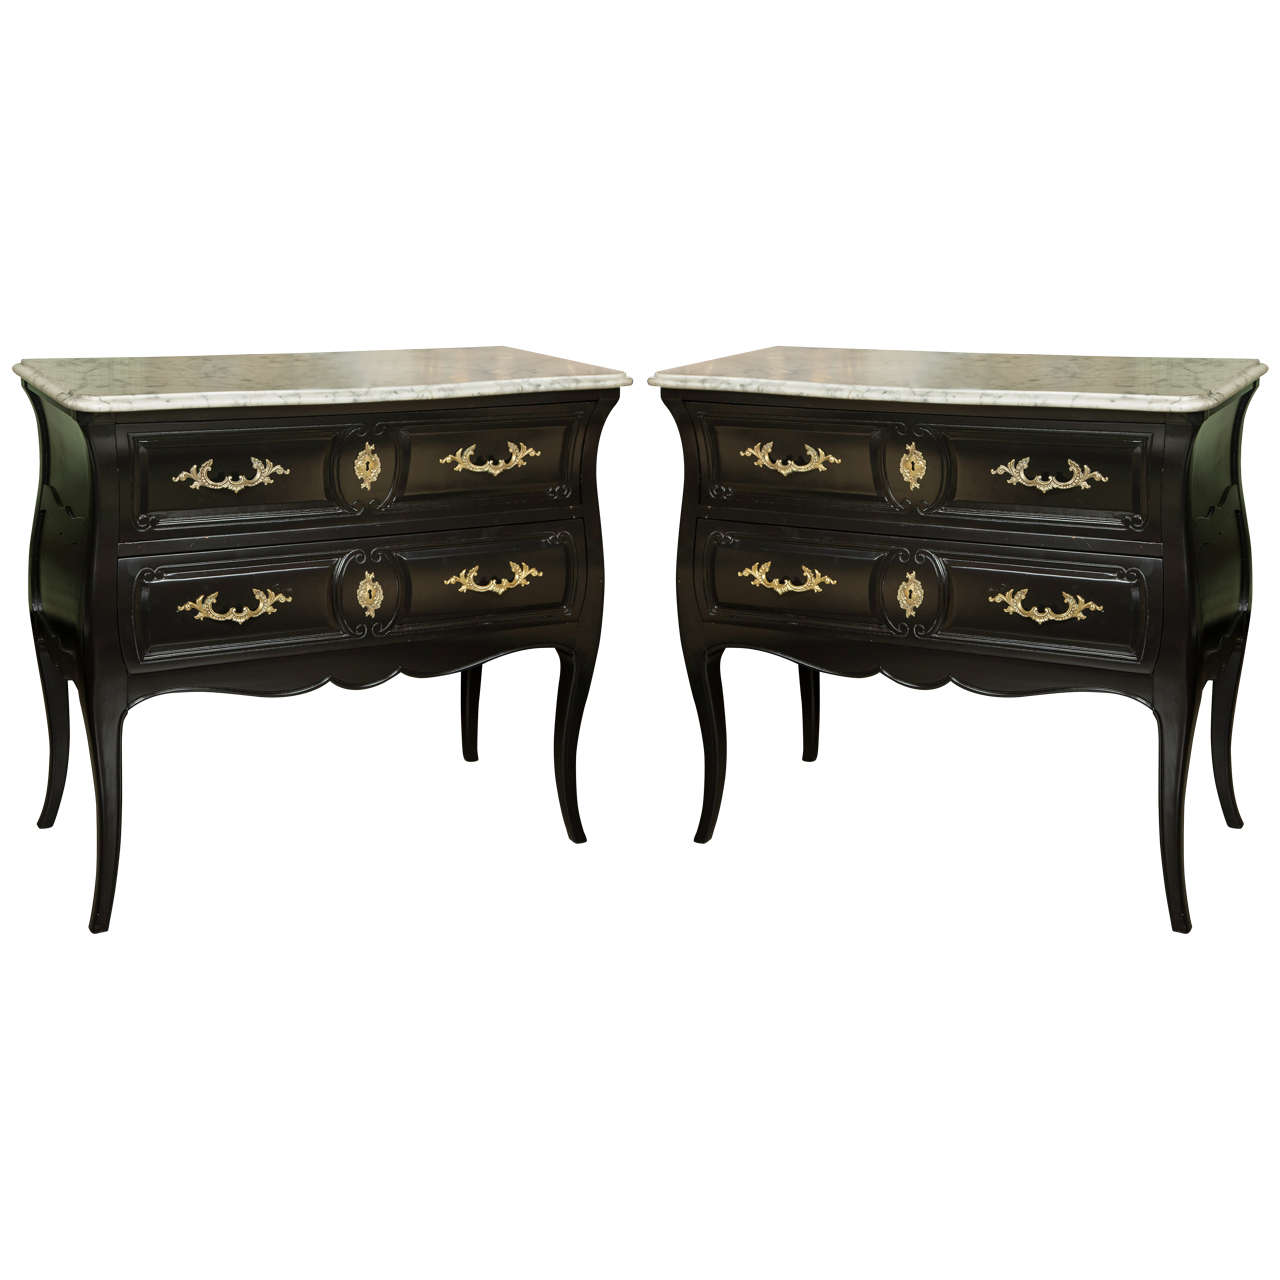 Pair of Bombe Maison Jansen Nightstand or Commodes